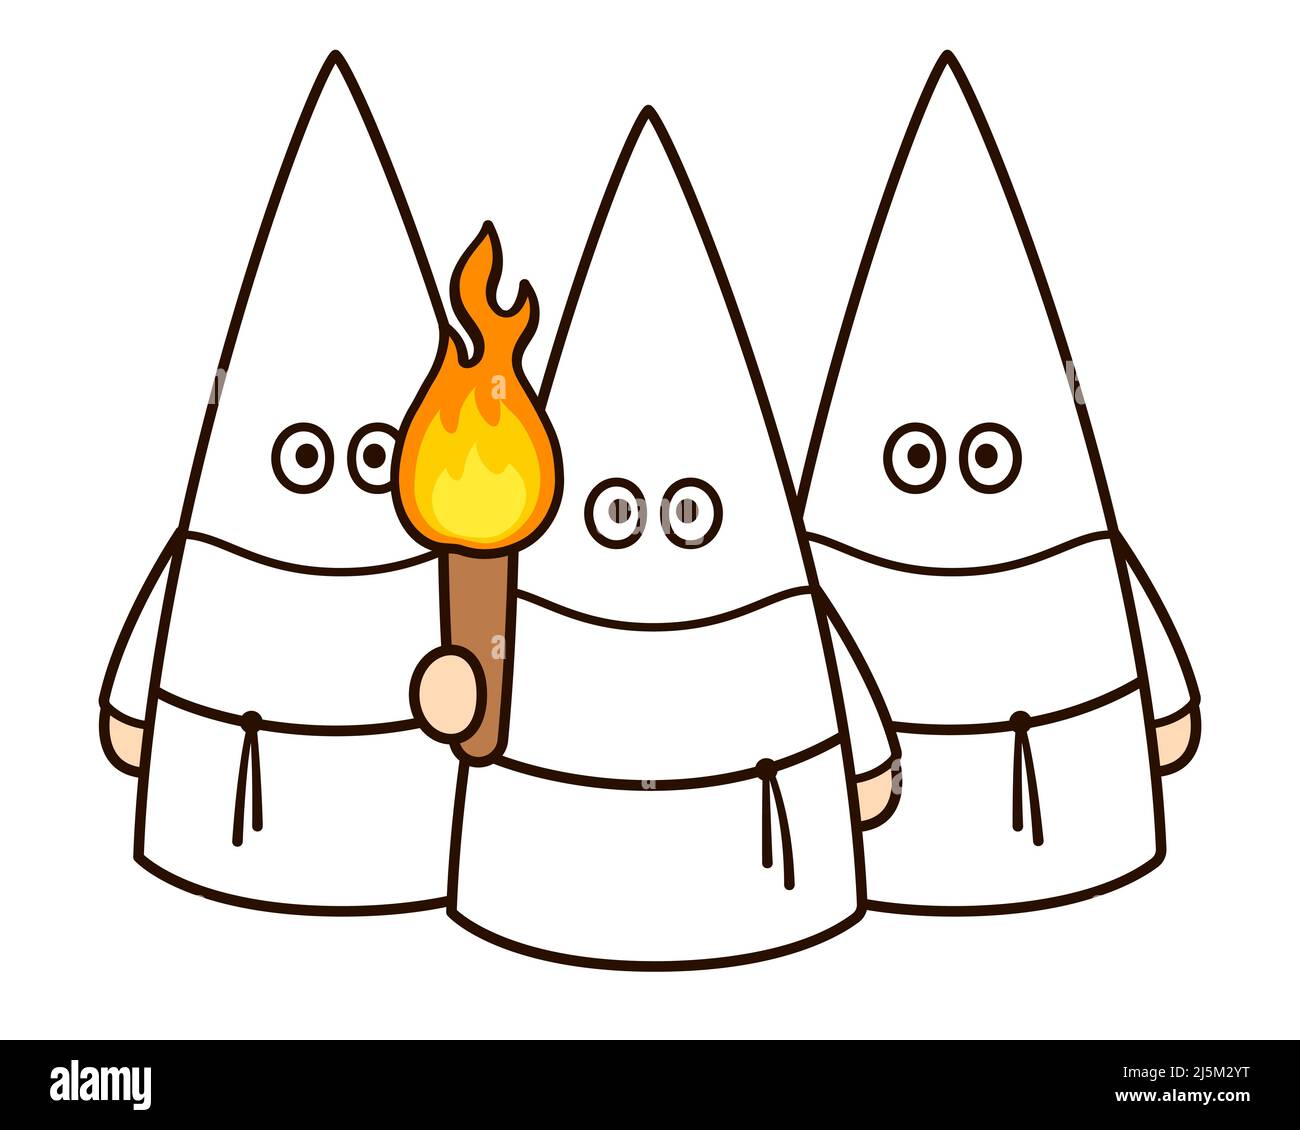 A mob of Ku Klux Klan members in white hoods with torch. American history cartoon, white supremacy extremists. Vector clip art illustration. Stock Vector